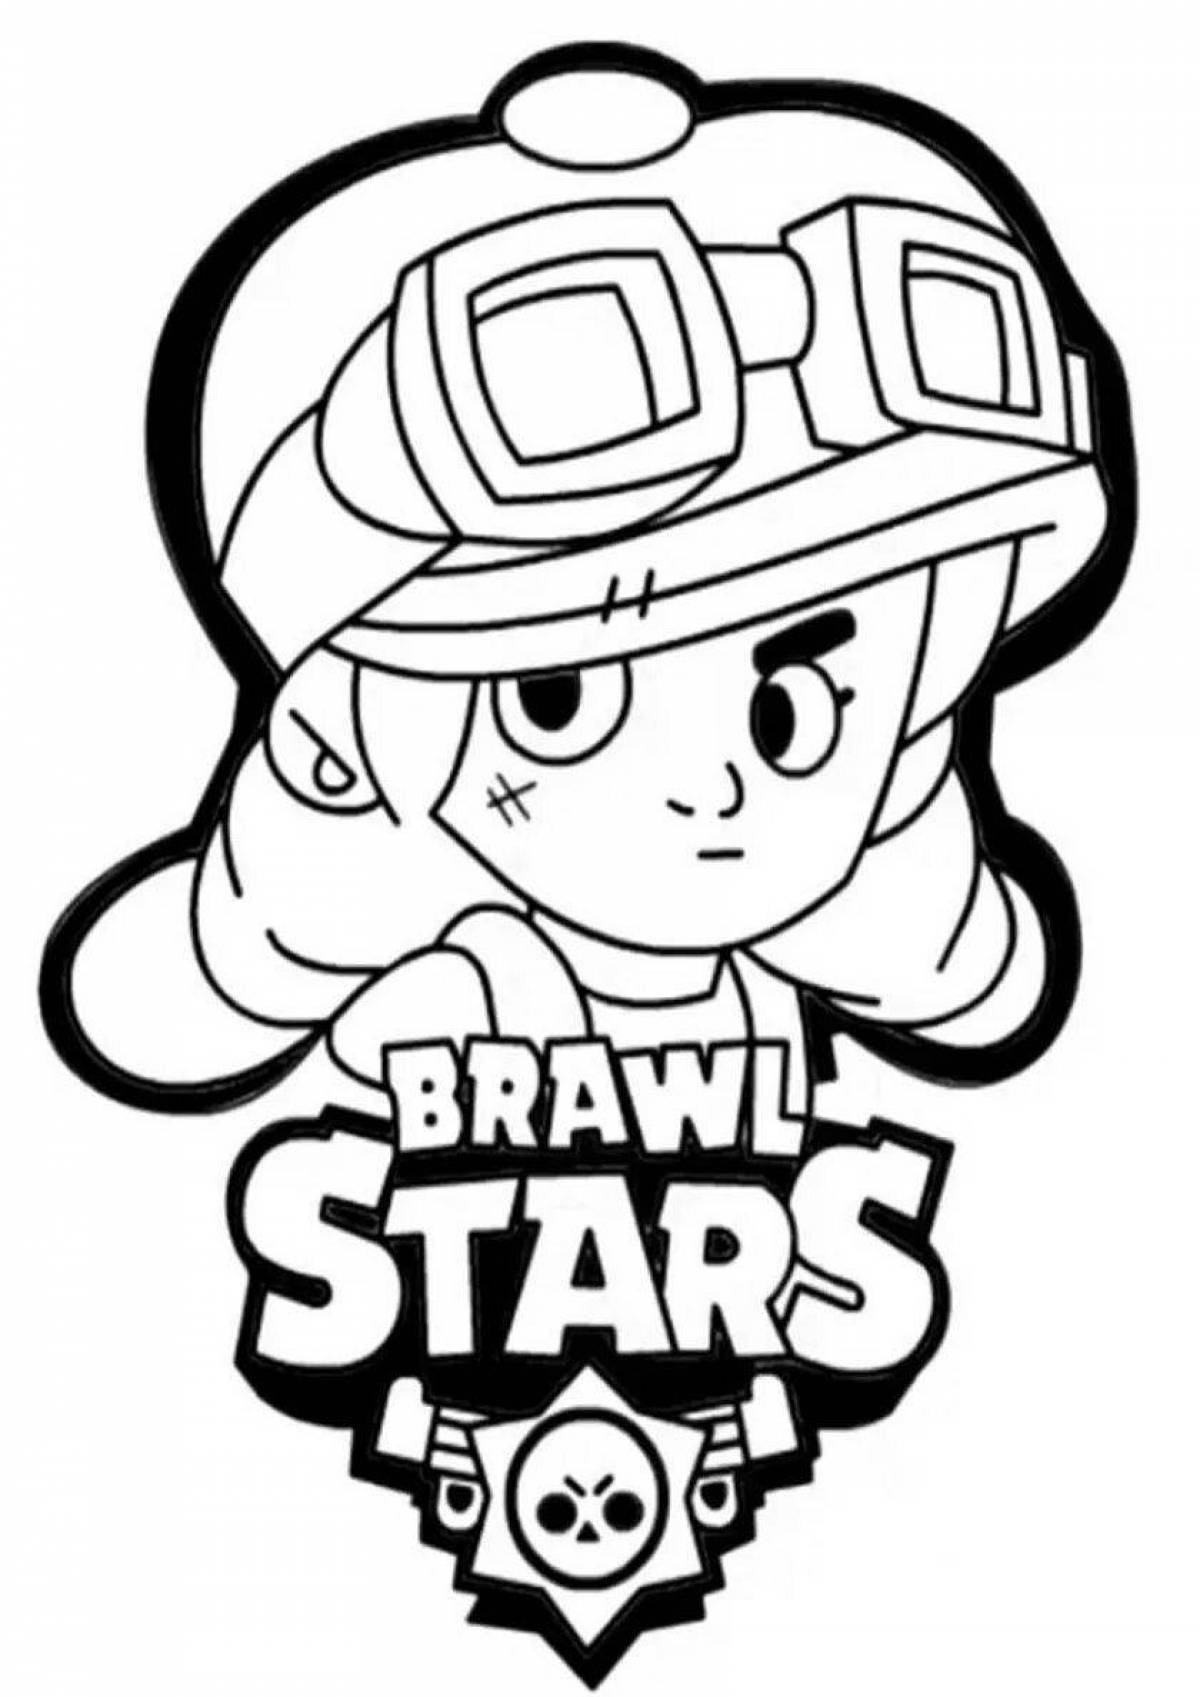 Awesome bravo stars fighter badges